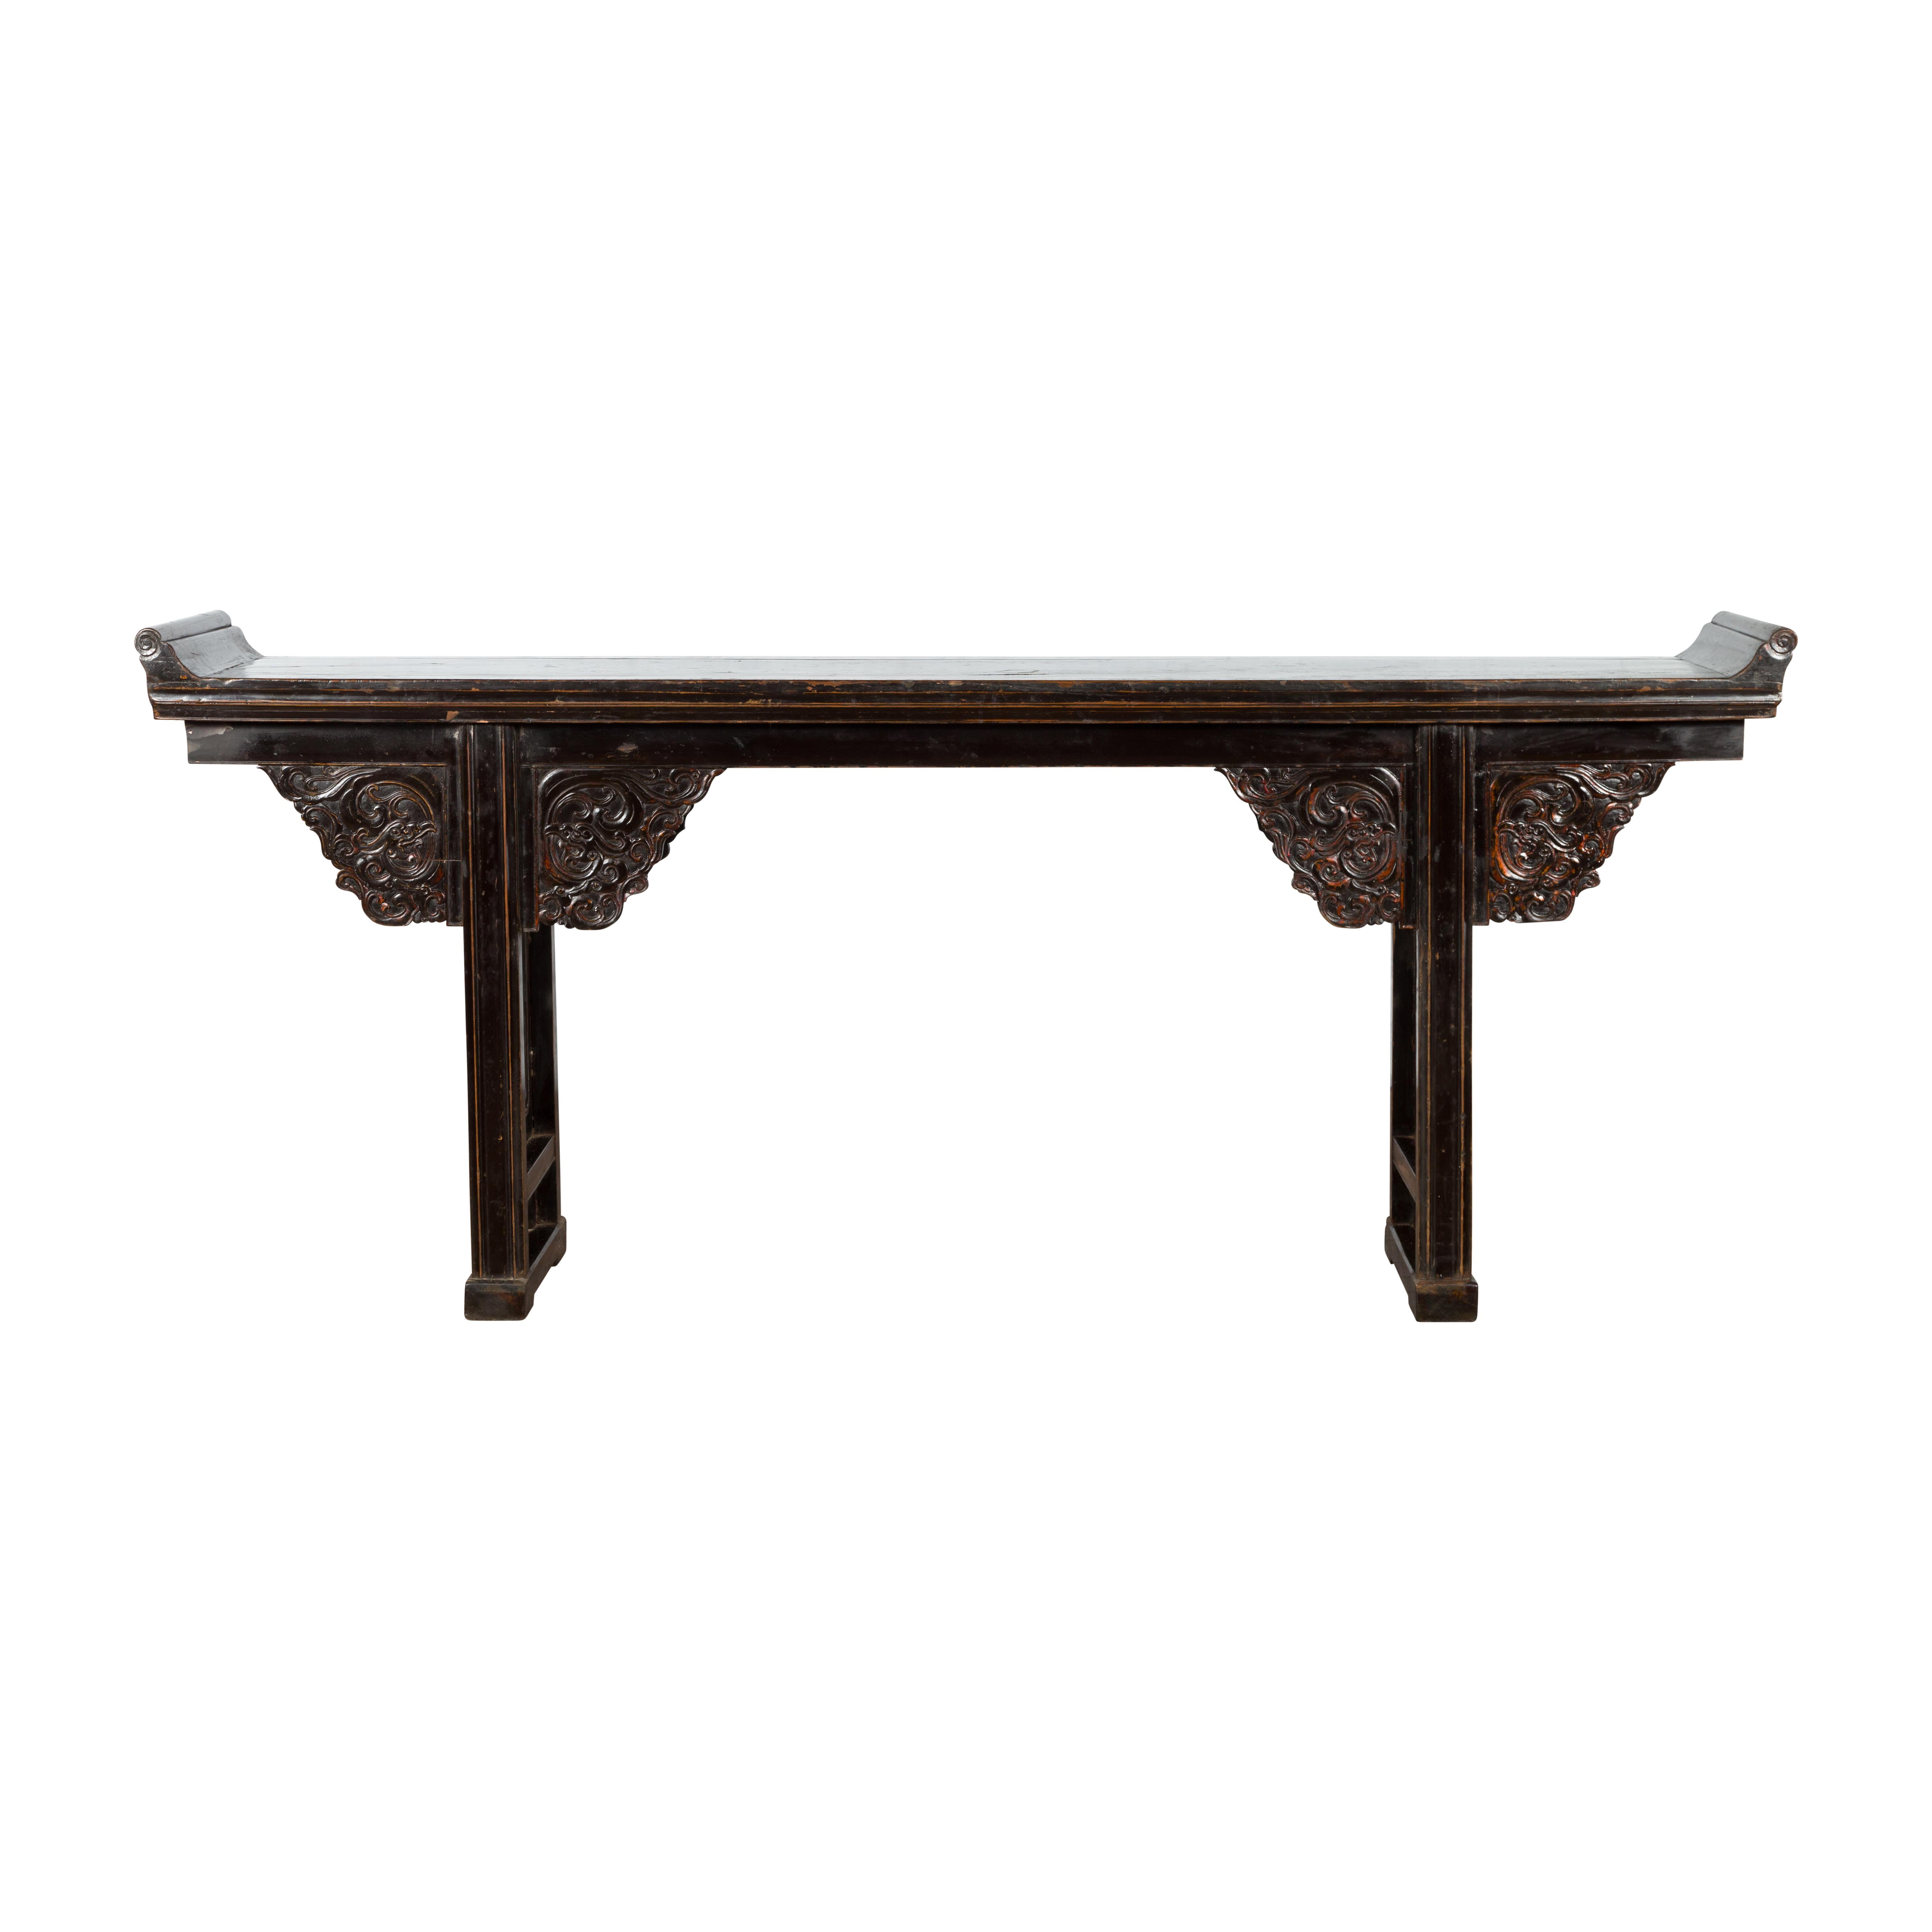 Chinese Qing Dynasty 19th Century Black Console Table with Carved Dragon Motifs For Sale 15